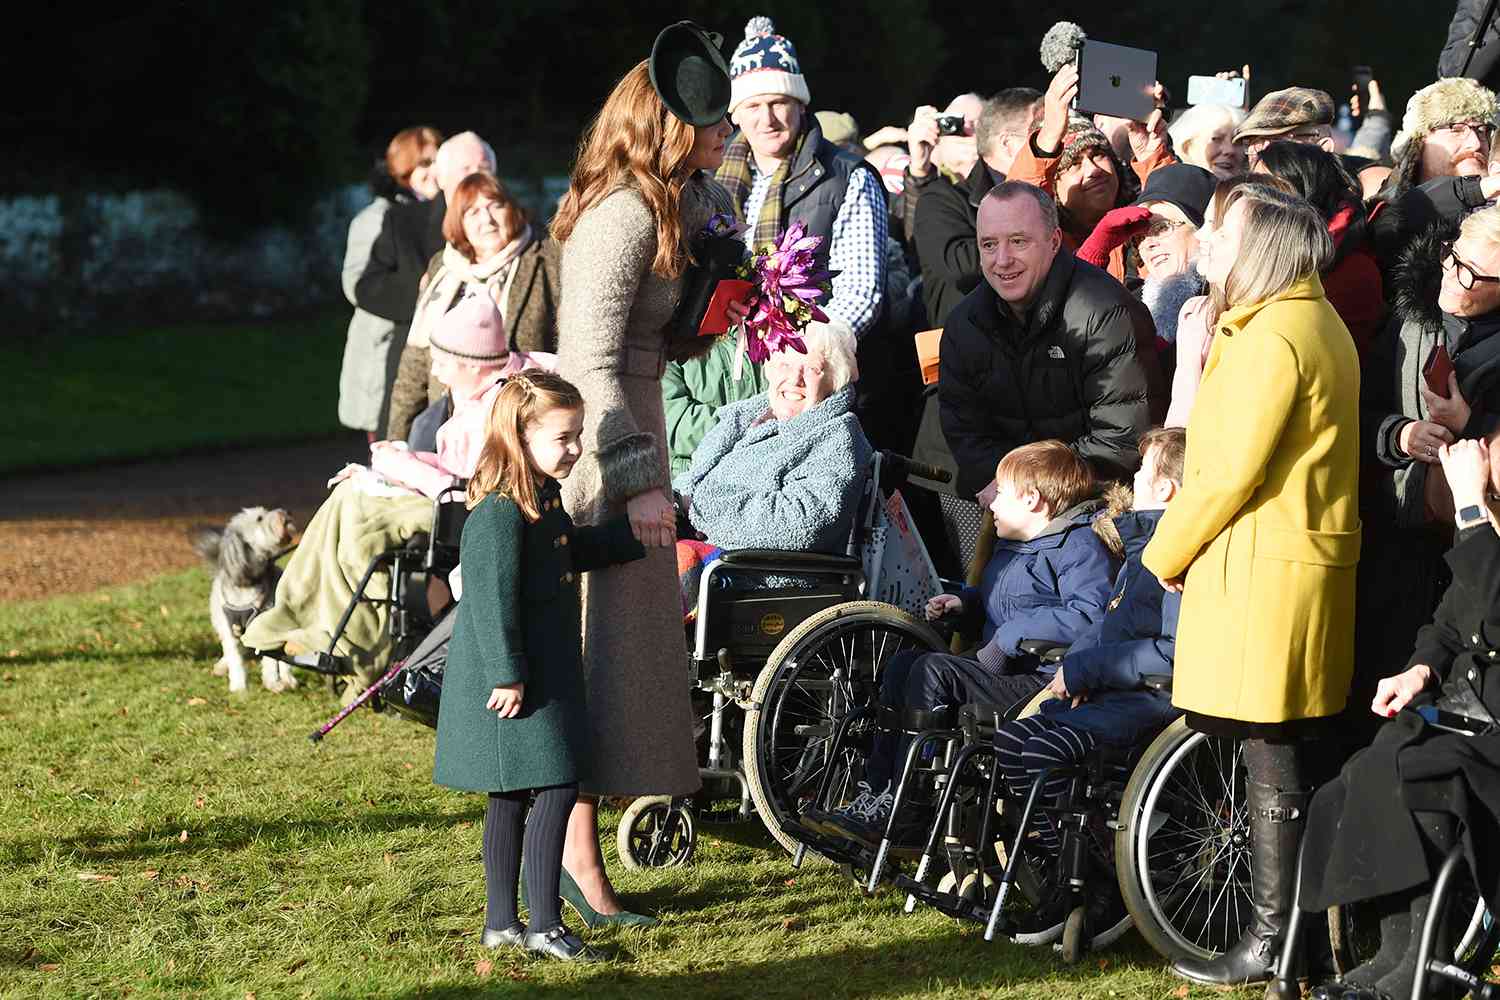 The Duchess of Cambridge and Princess Charlotte meet well wishers after attending the Christmas Day morning church service at St Mary Magdalene Church in Sandringham, Norfolk. (Photo by Joe Giddens/PA Images via Getty Images)